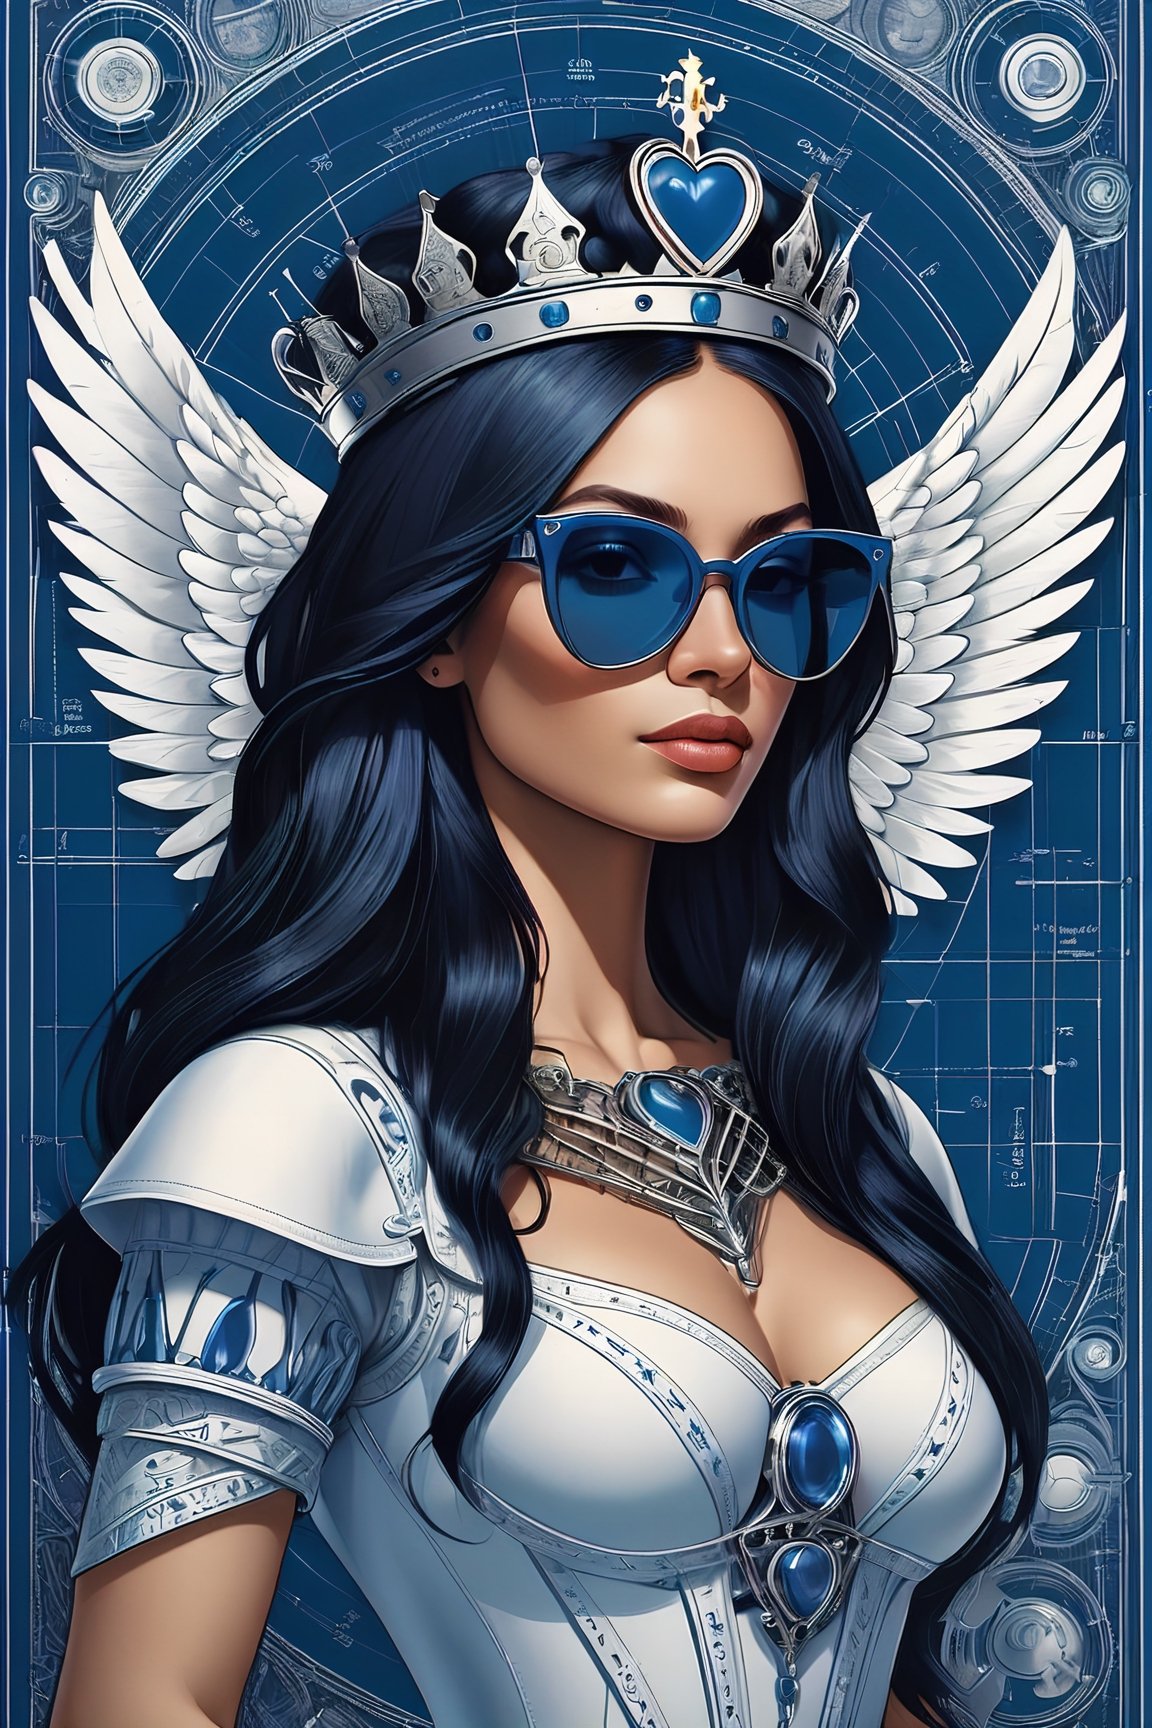 Mechanical Blueprint Poster: Queen if Hearts Playing Card, "Q" in all four corners, Detailed Technical Schematics and authentic blueprints meticulously outline the build of a woman with long, dark hair, tattoos, wings and a simple minimalistic crown on her head, sunglasses. Printed in precise white ink on authentic blueprint paper, these comprehensive plans unveil the intricacies of creating a human form. A thoughtful gift from your local community, explore Extreme Technical Detail, reminiscent of traditional Illustration drafting, rendered in high-resolution 16k, to foster a clear understanding, poster, illustration, typography, conceptual art, dark fantasy